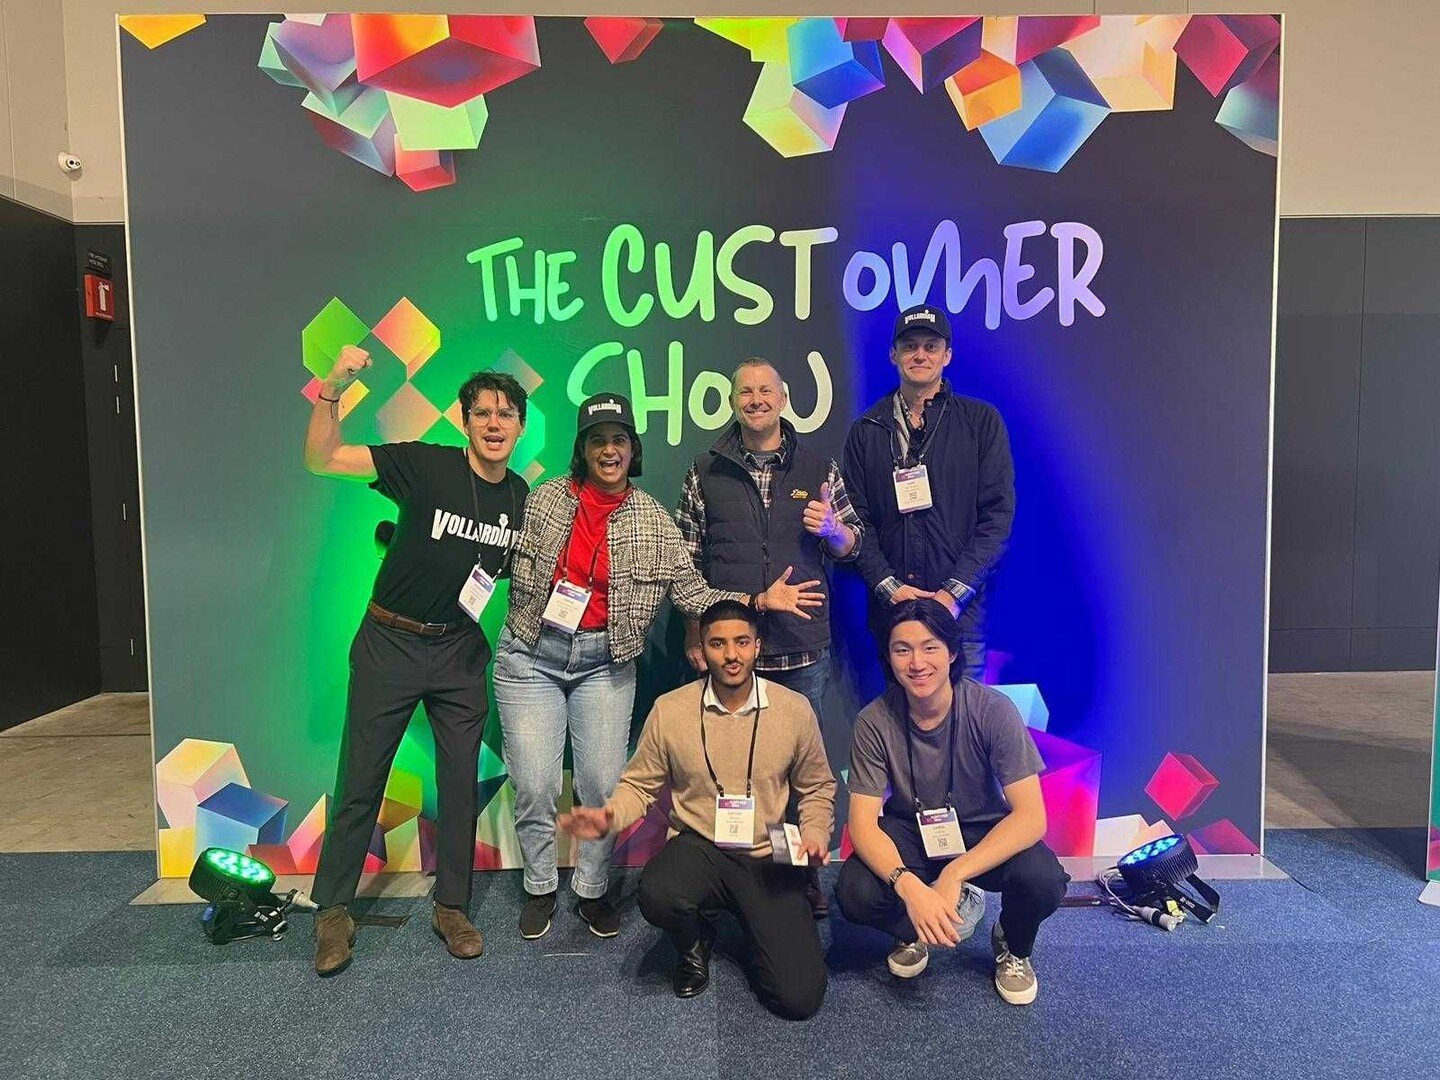 We had an amazing time at the #TheCustomerShow last week! 

It was great to showcase some of the great work we've done, meet some like minded people, and show our incredible artistic capabilities 😅 

Thank you for everyone who made their way over to